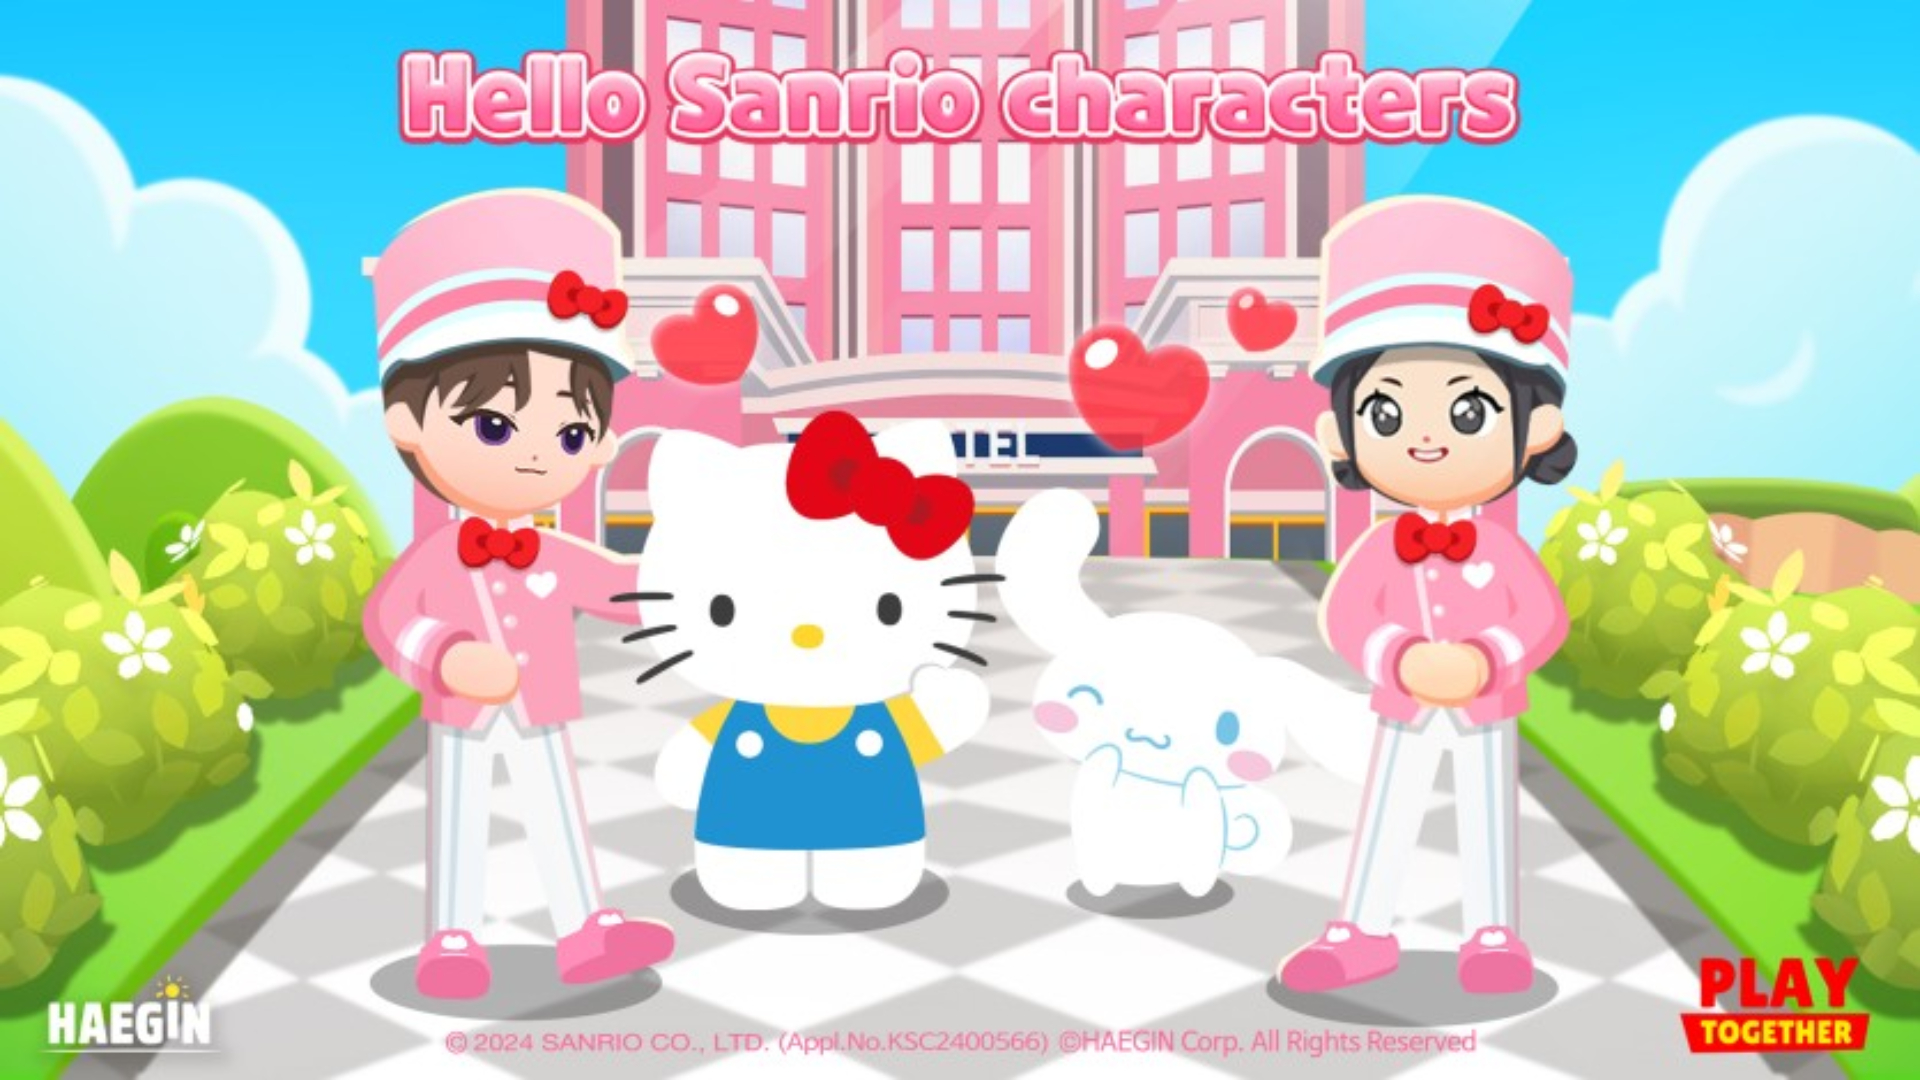 Play Together X Sanrio Characters Collaboration Announced